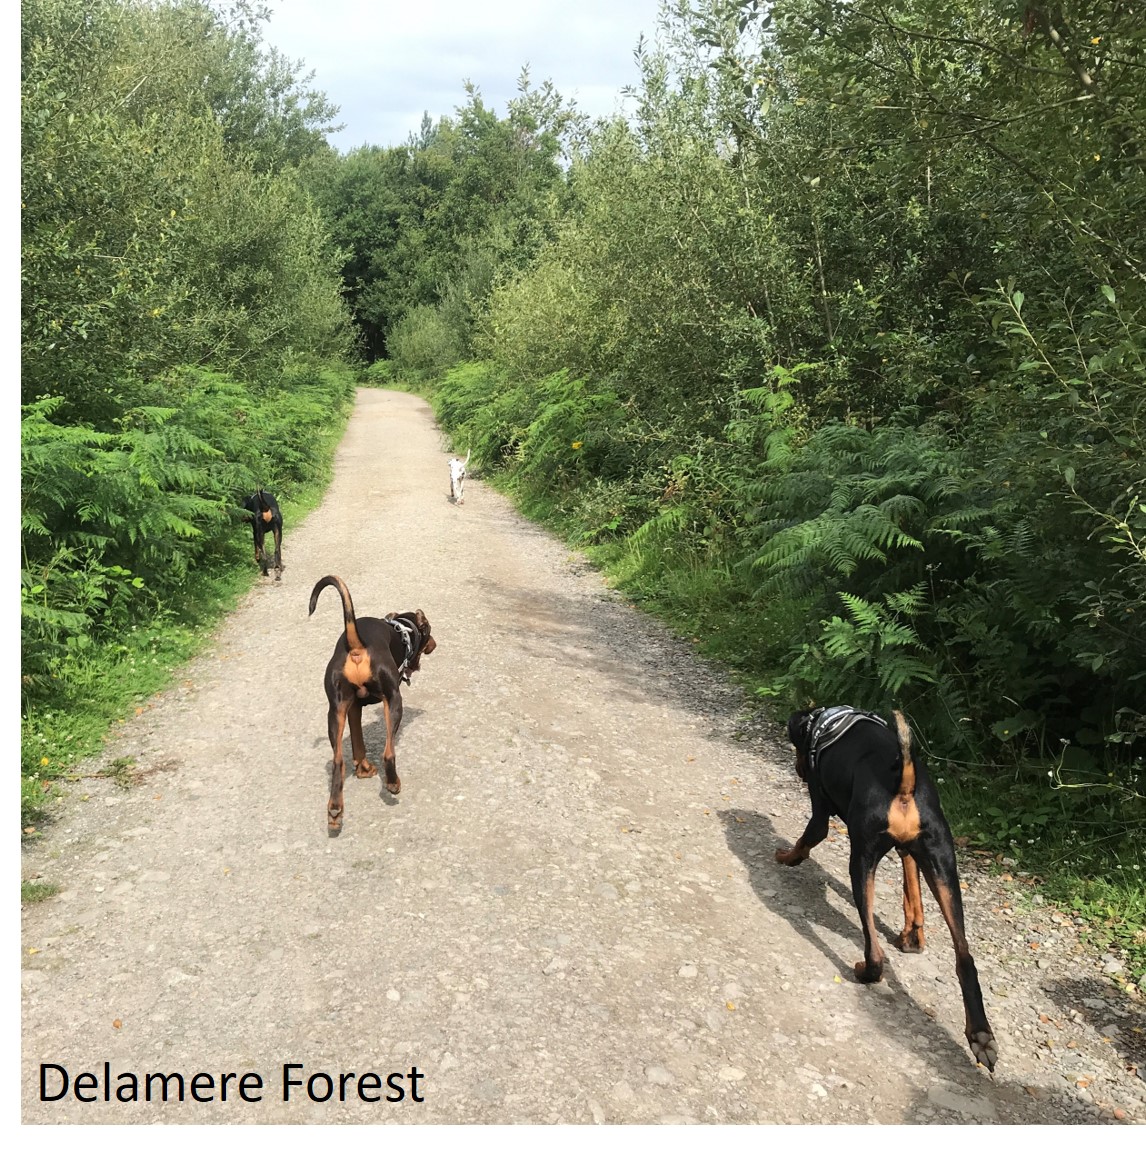 #throwbackthrusday - sharing special moments from #reubenthefosterdog holiday with #corathedalmatian and me.
#doberman #dobermann #dalmatain #memories #walkies #hodnethall #haughmondhill #delamere #leebrockhursthill #nationaltrust #naturereserve